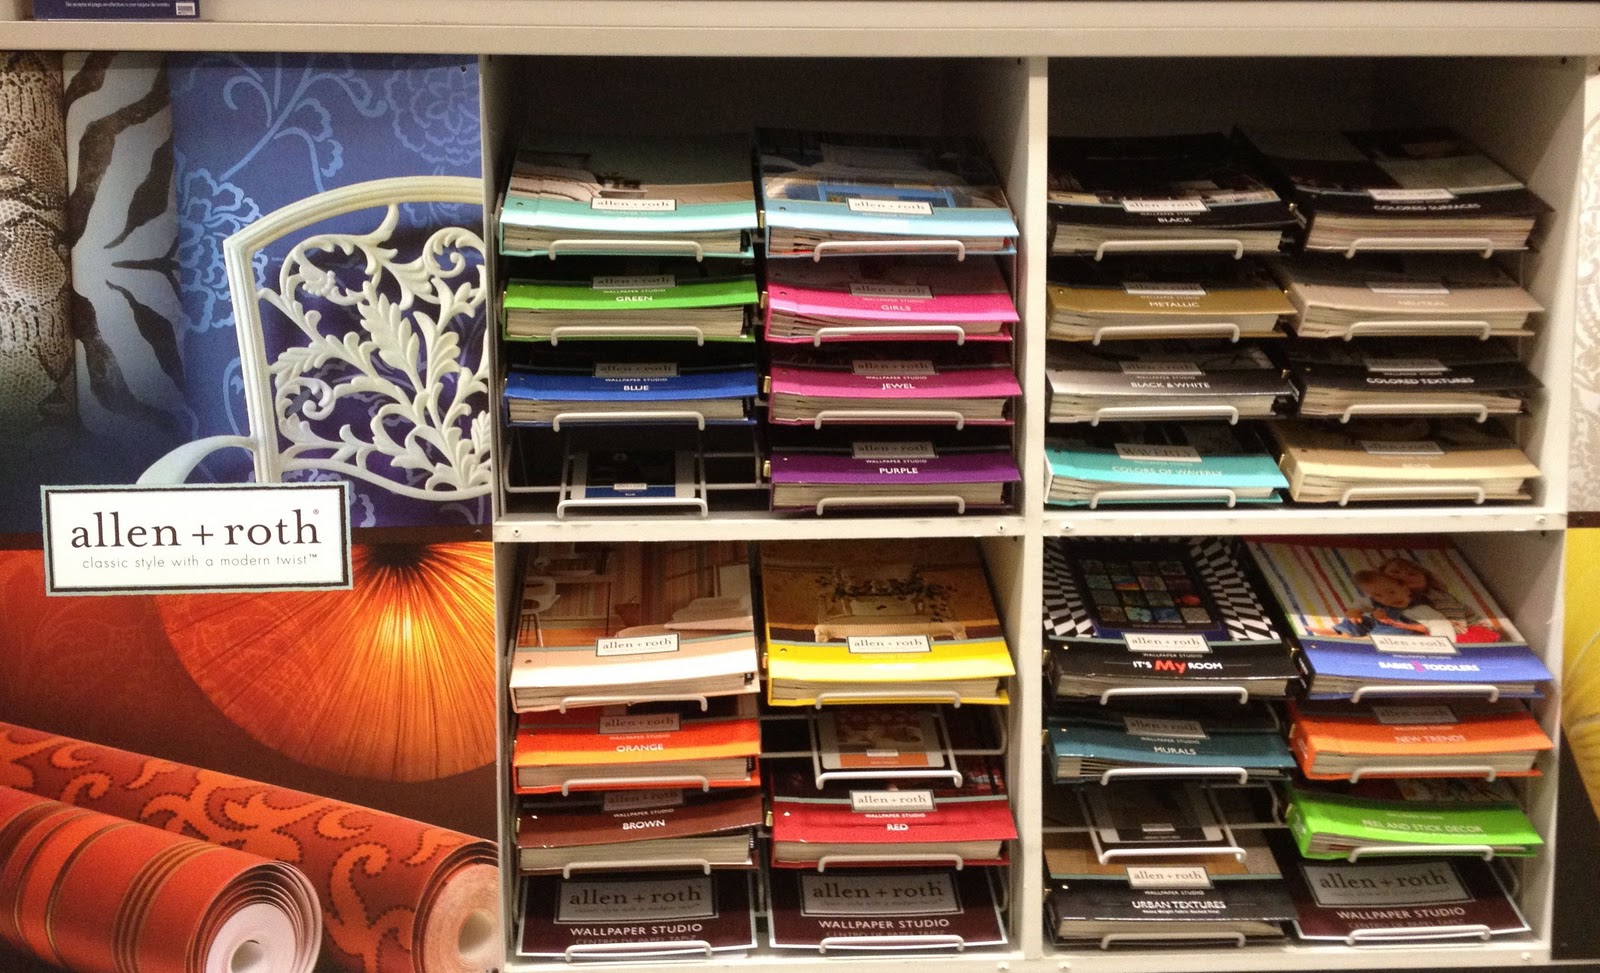 Even Have A Section With Color Coded Allen Roth Wallpaper Books